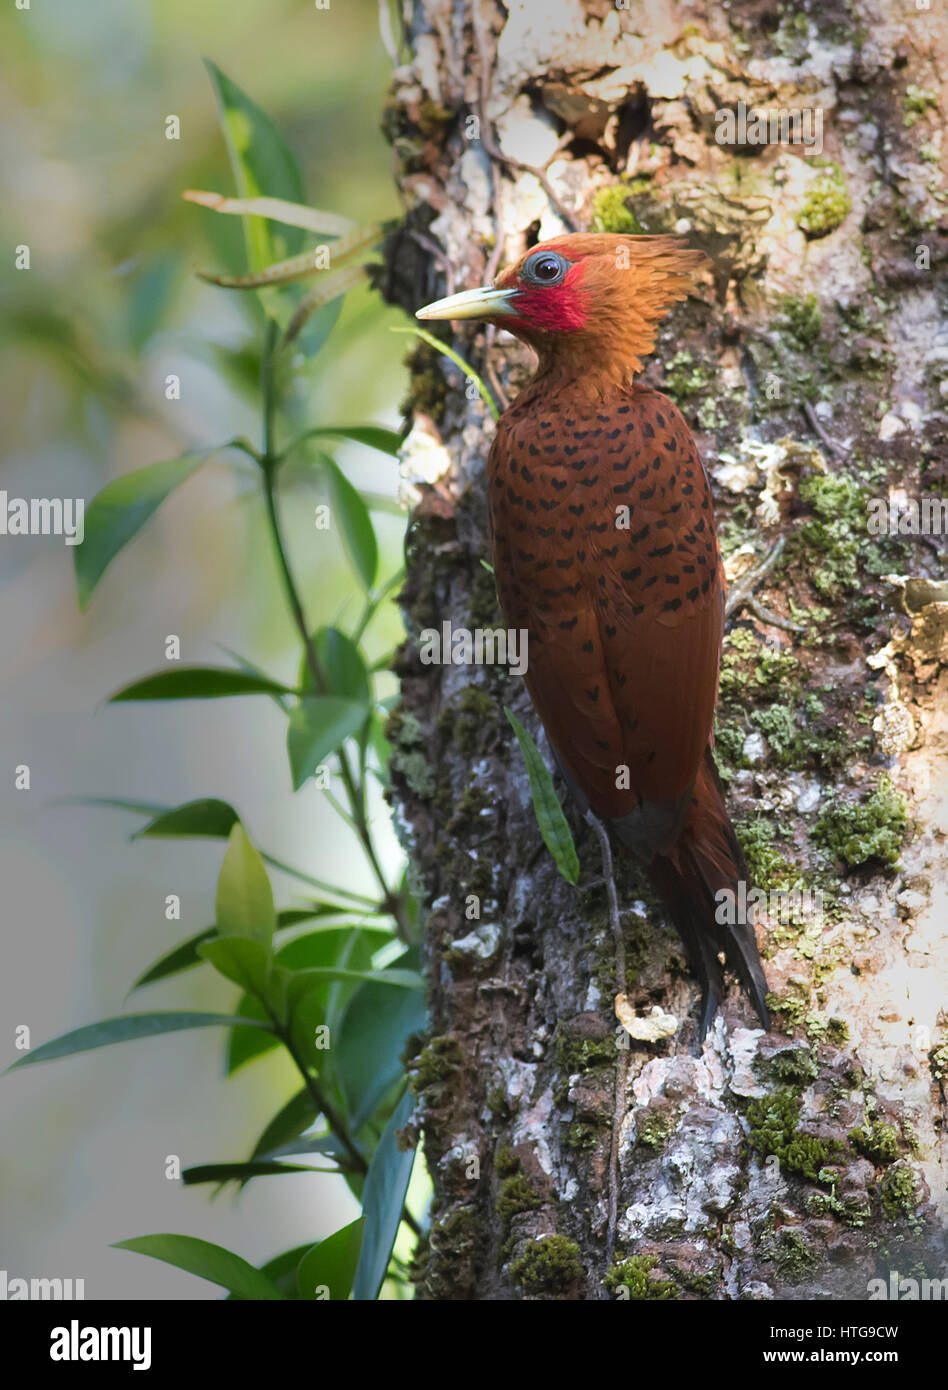 Chestnut-colored Woodpecker clinging to a tree Stock Photo